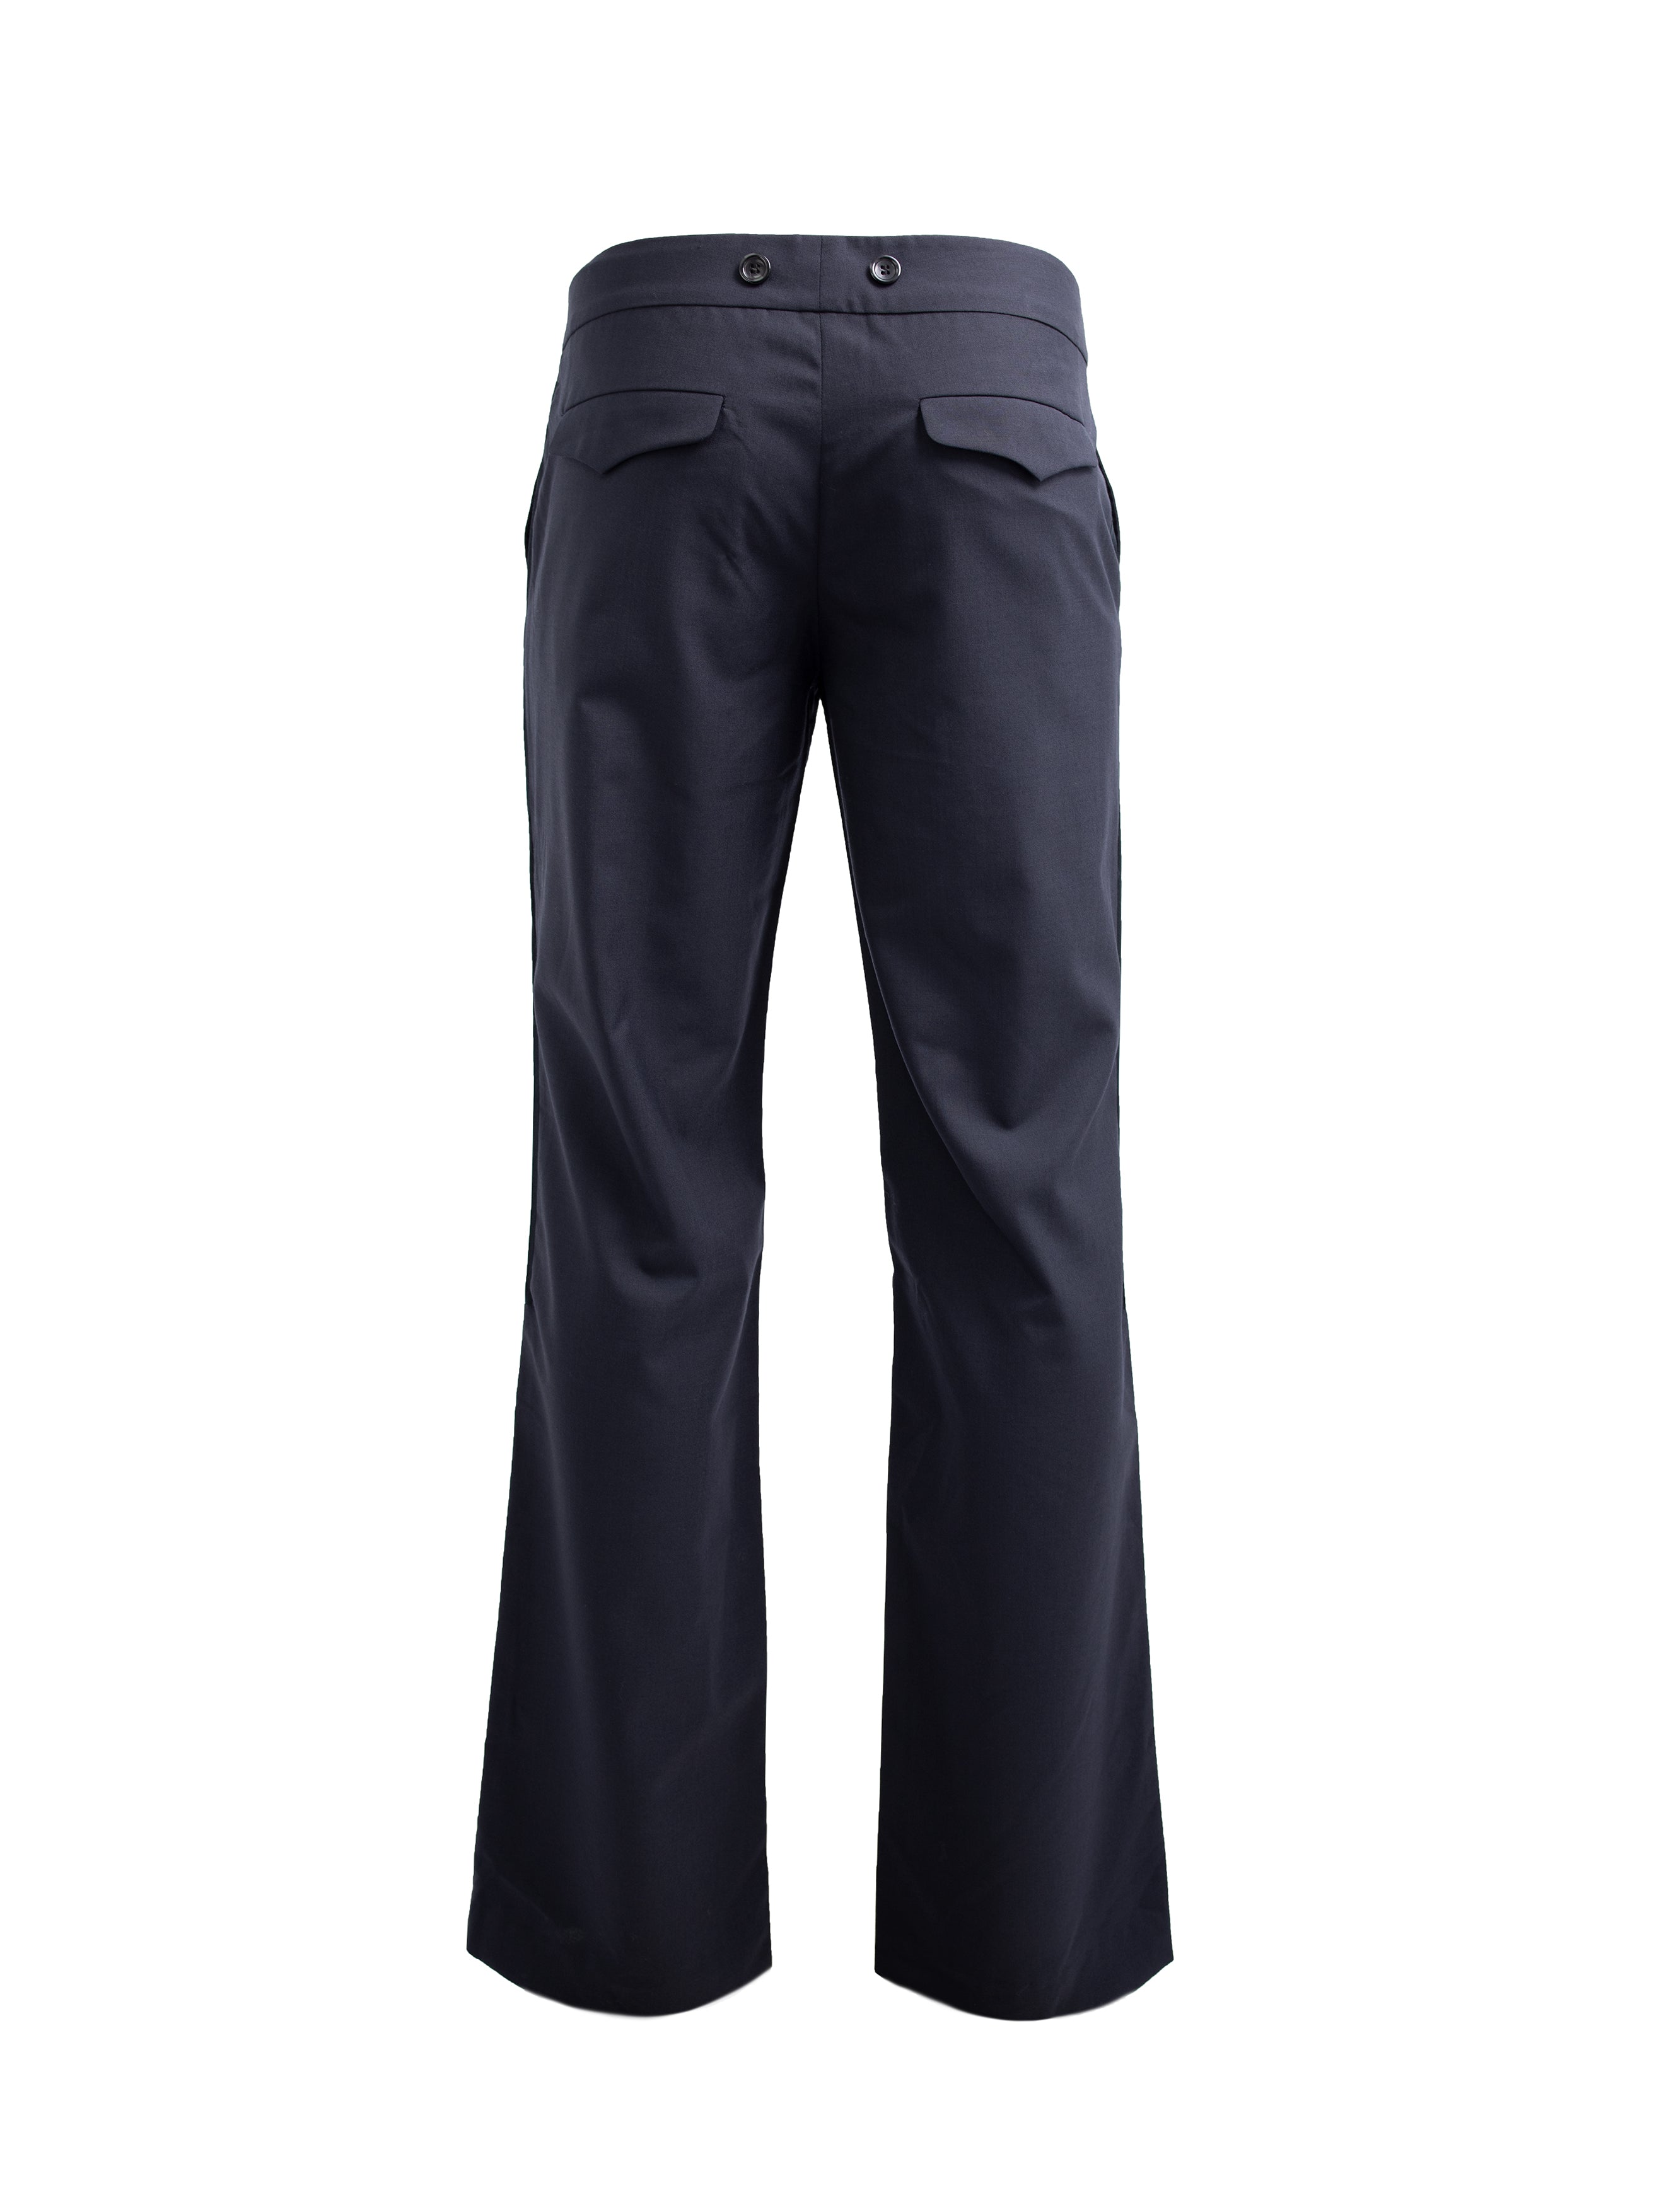 NAVY BLUE TROUSERS WITH SILK STRIPE